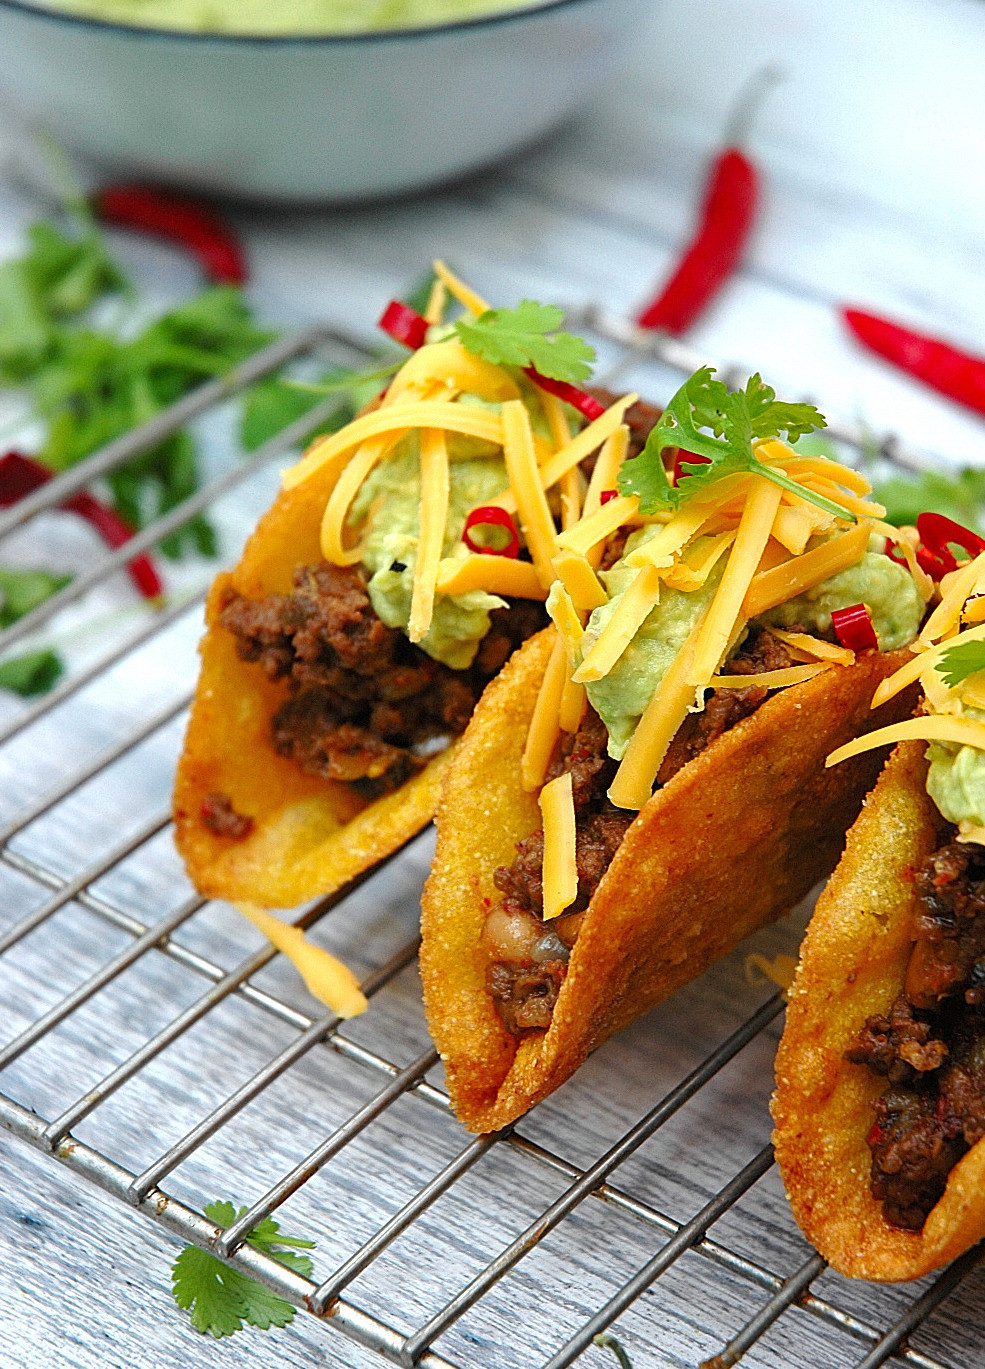 Authentic Mexican Ground Beef Taco Recipe Shredded Recipetineats Gallo ...